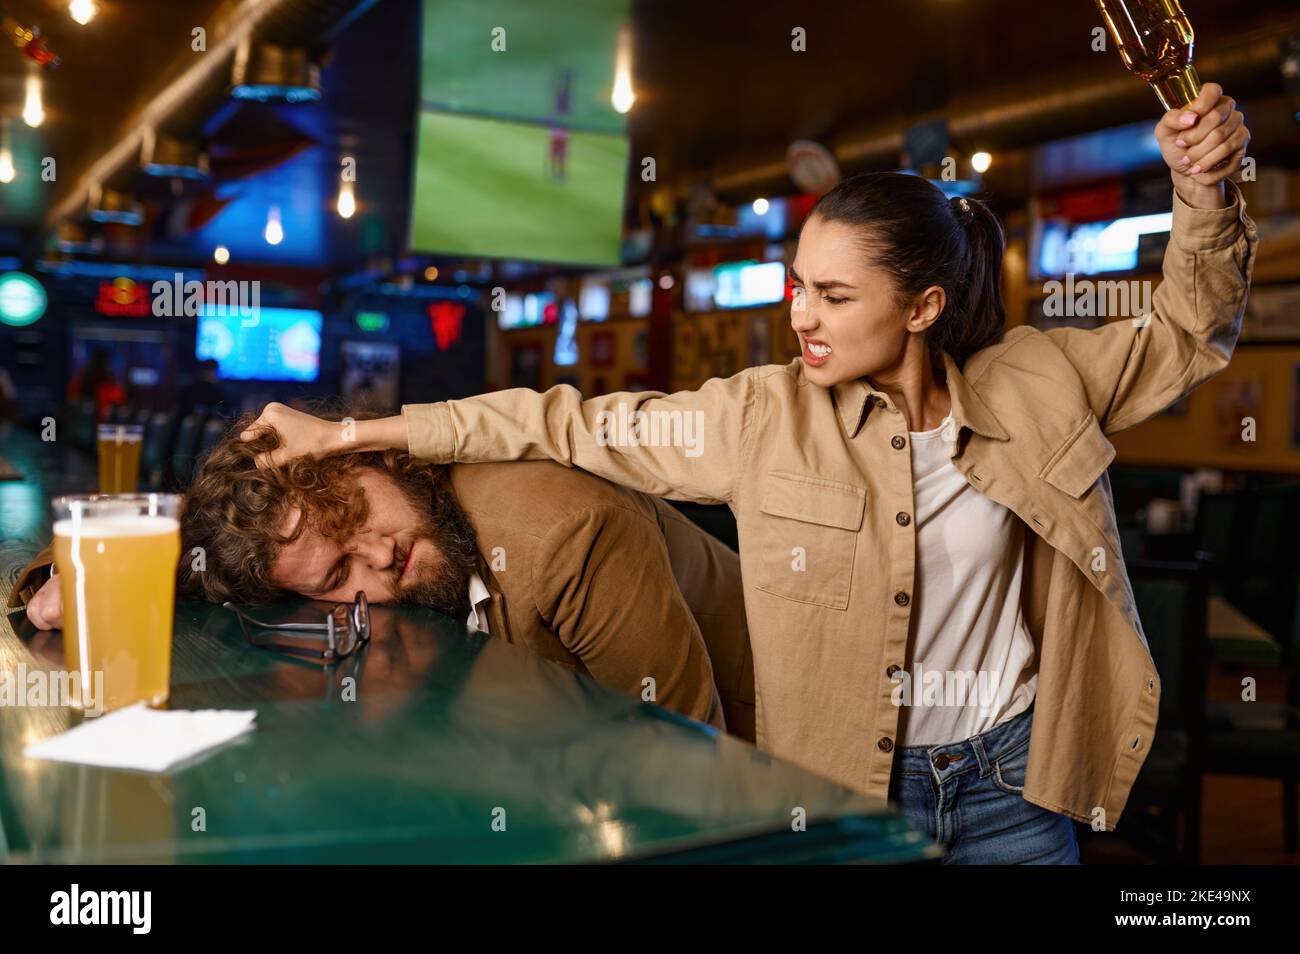 Unhappy and angry fans fighting at sport bar Stock Photo